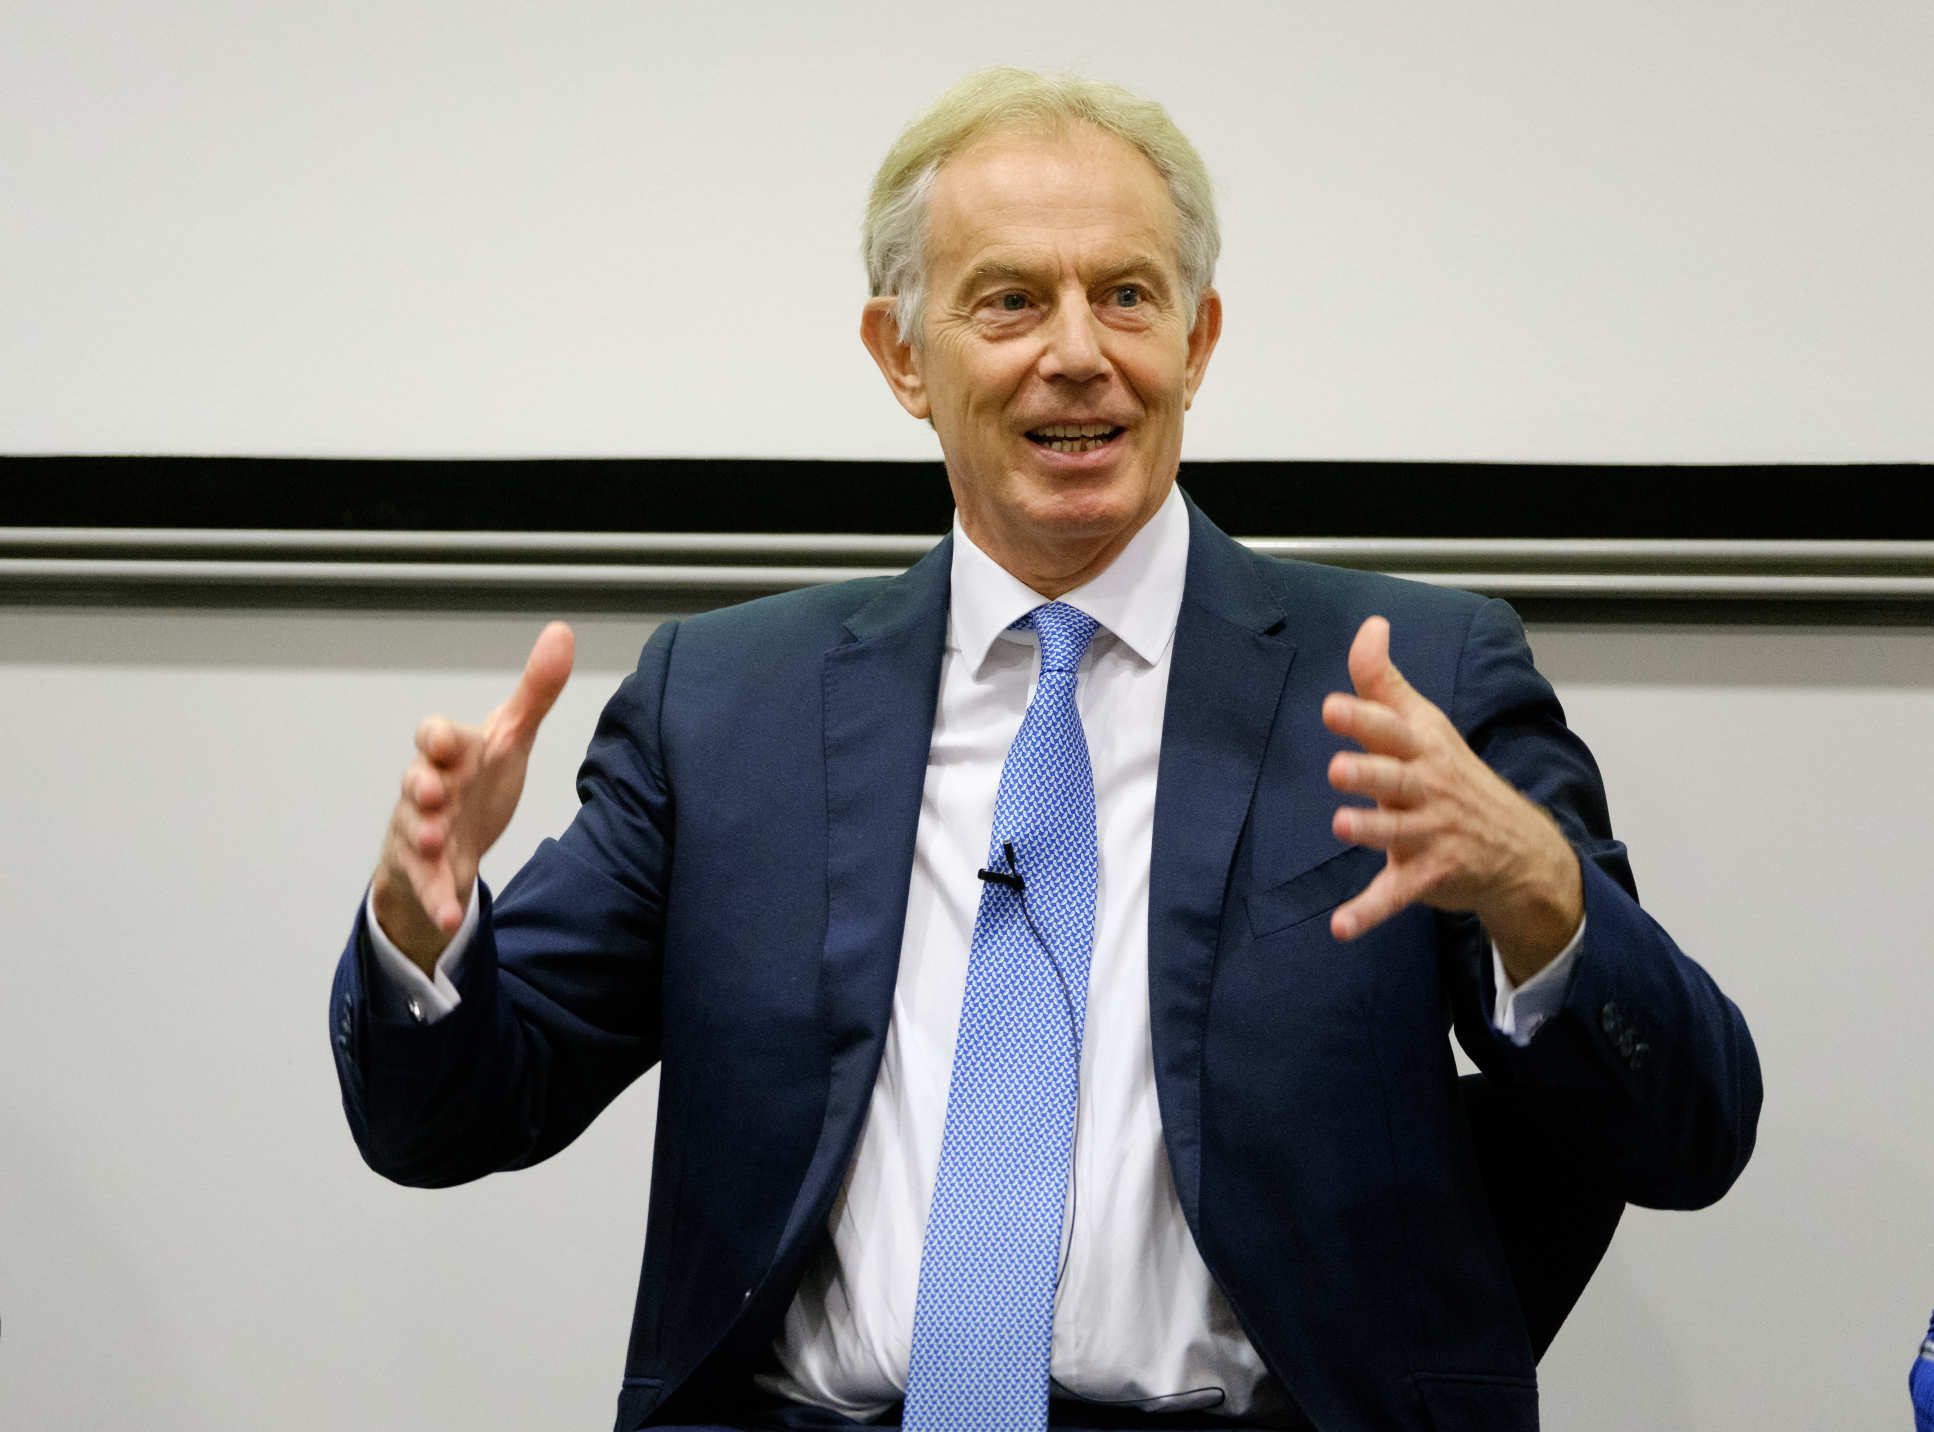 Speaking on a panel during the event, Mr Blair said: “The challenge for the NHS is to stay true to its principles but be under a constant state of change and modernization” 